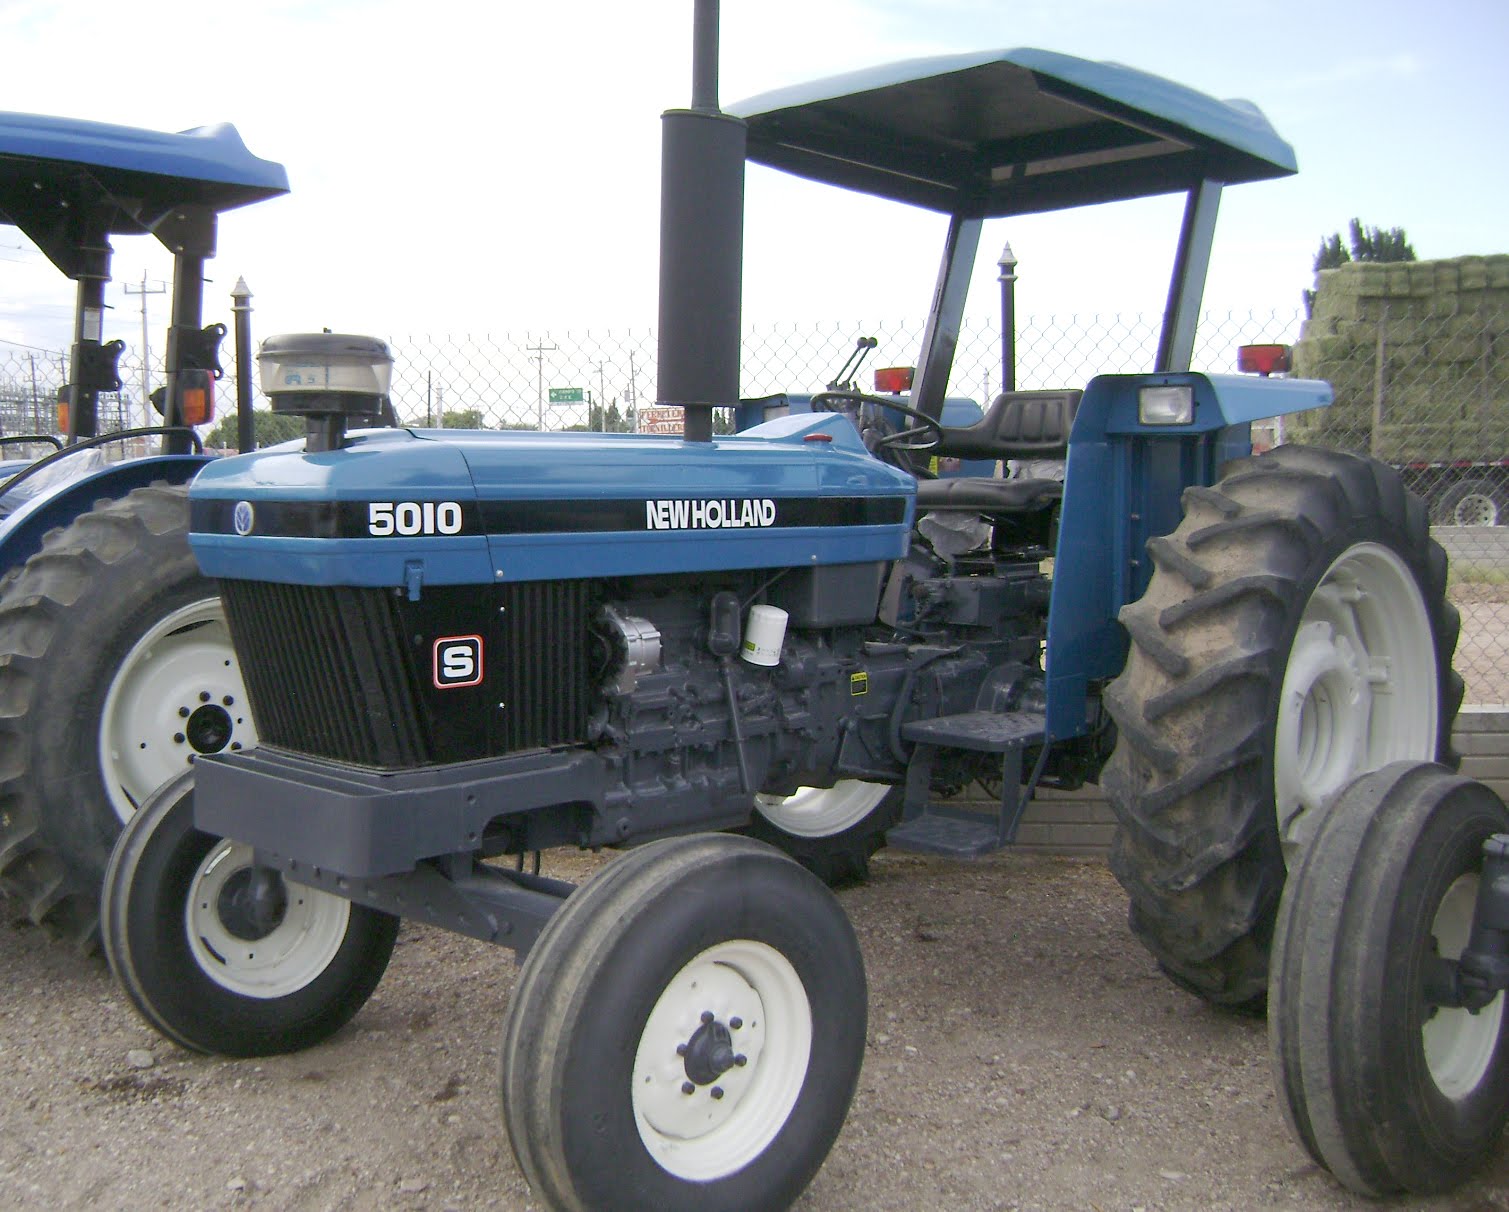 ... : Tractor New Holland 5010, 70hp, 2003, 836 horas, $14700 Dlls